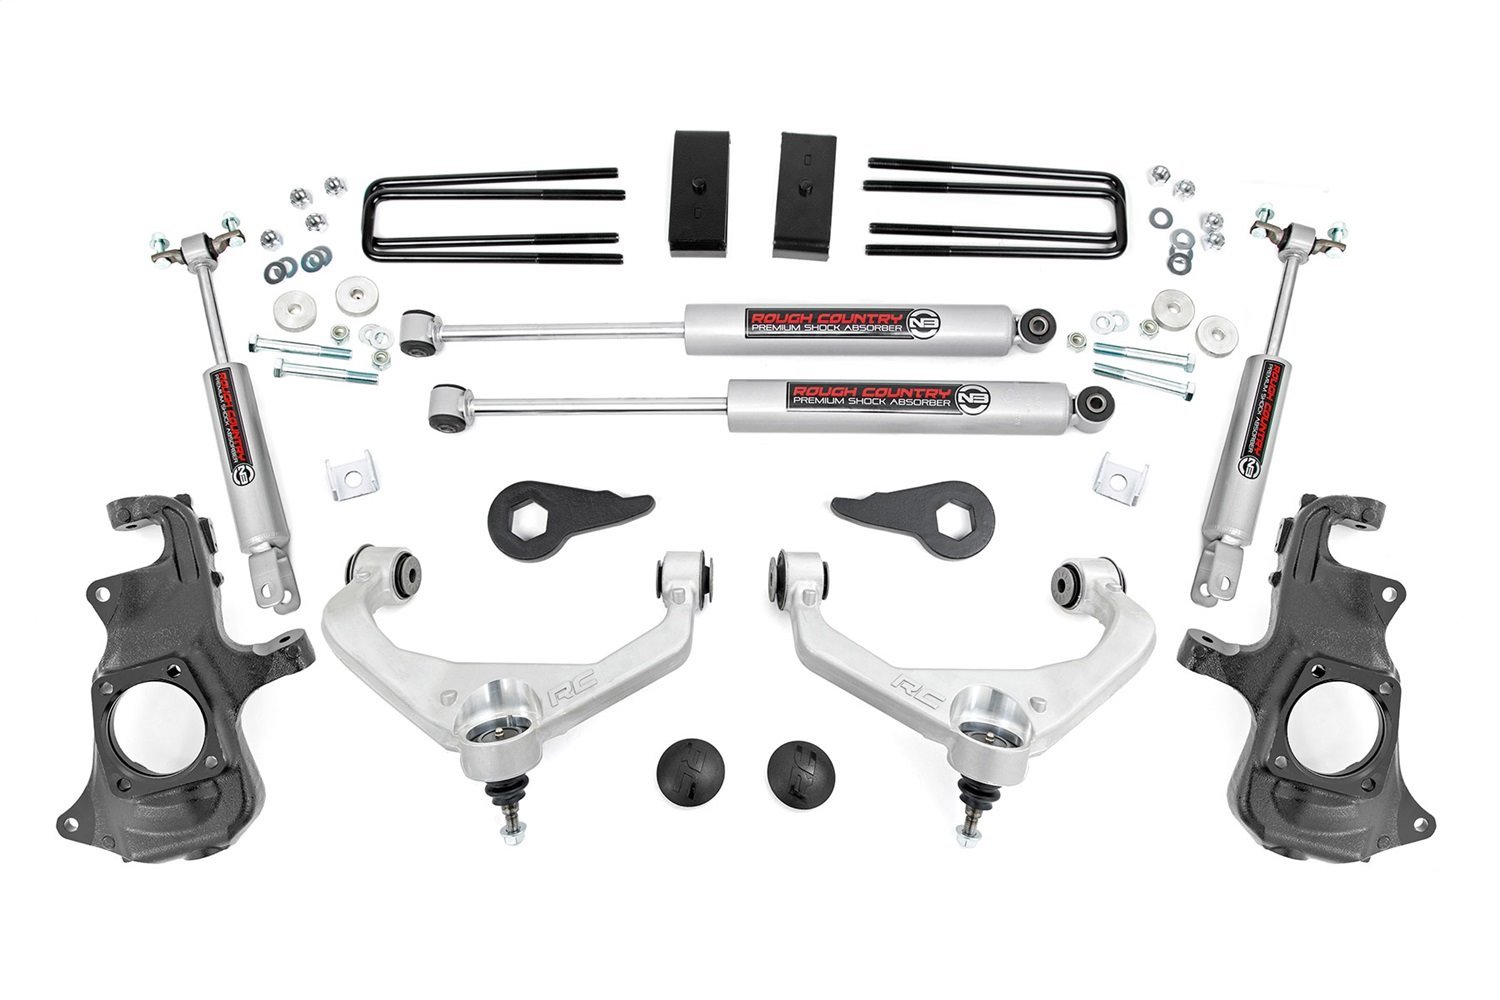 95730 3.5 in. Lift Kit, Knuckle, Chevy/GMC 2500HD/3500HD (11-19)